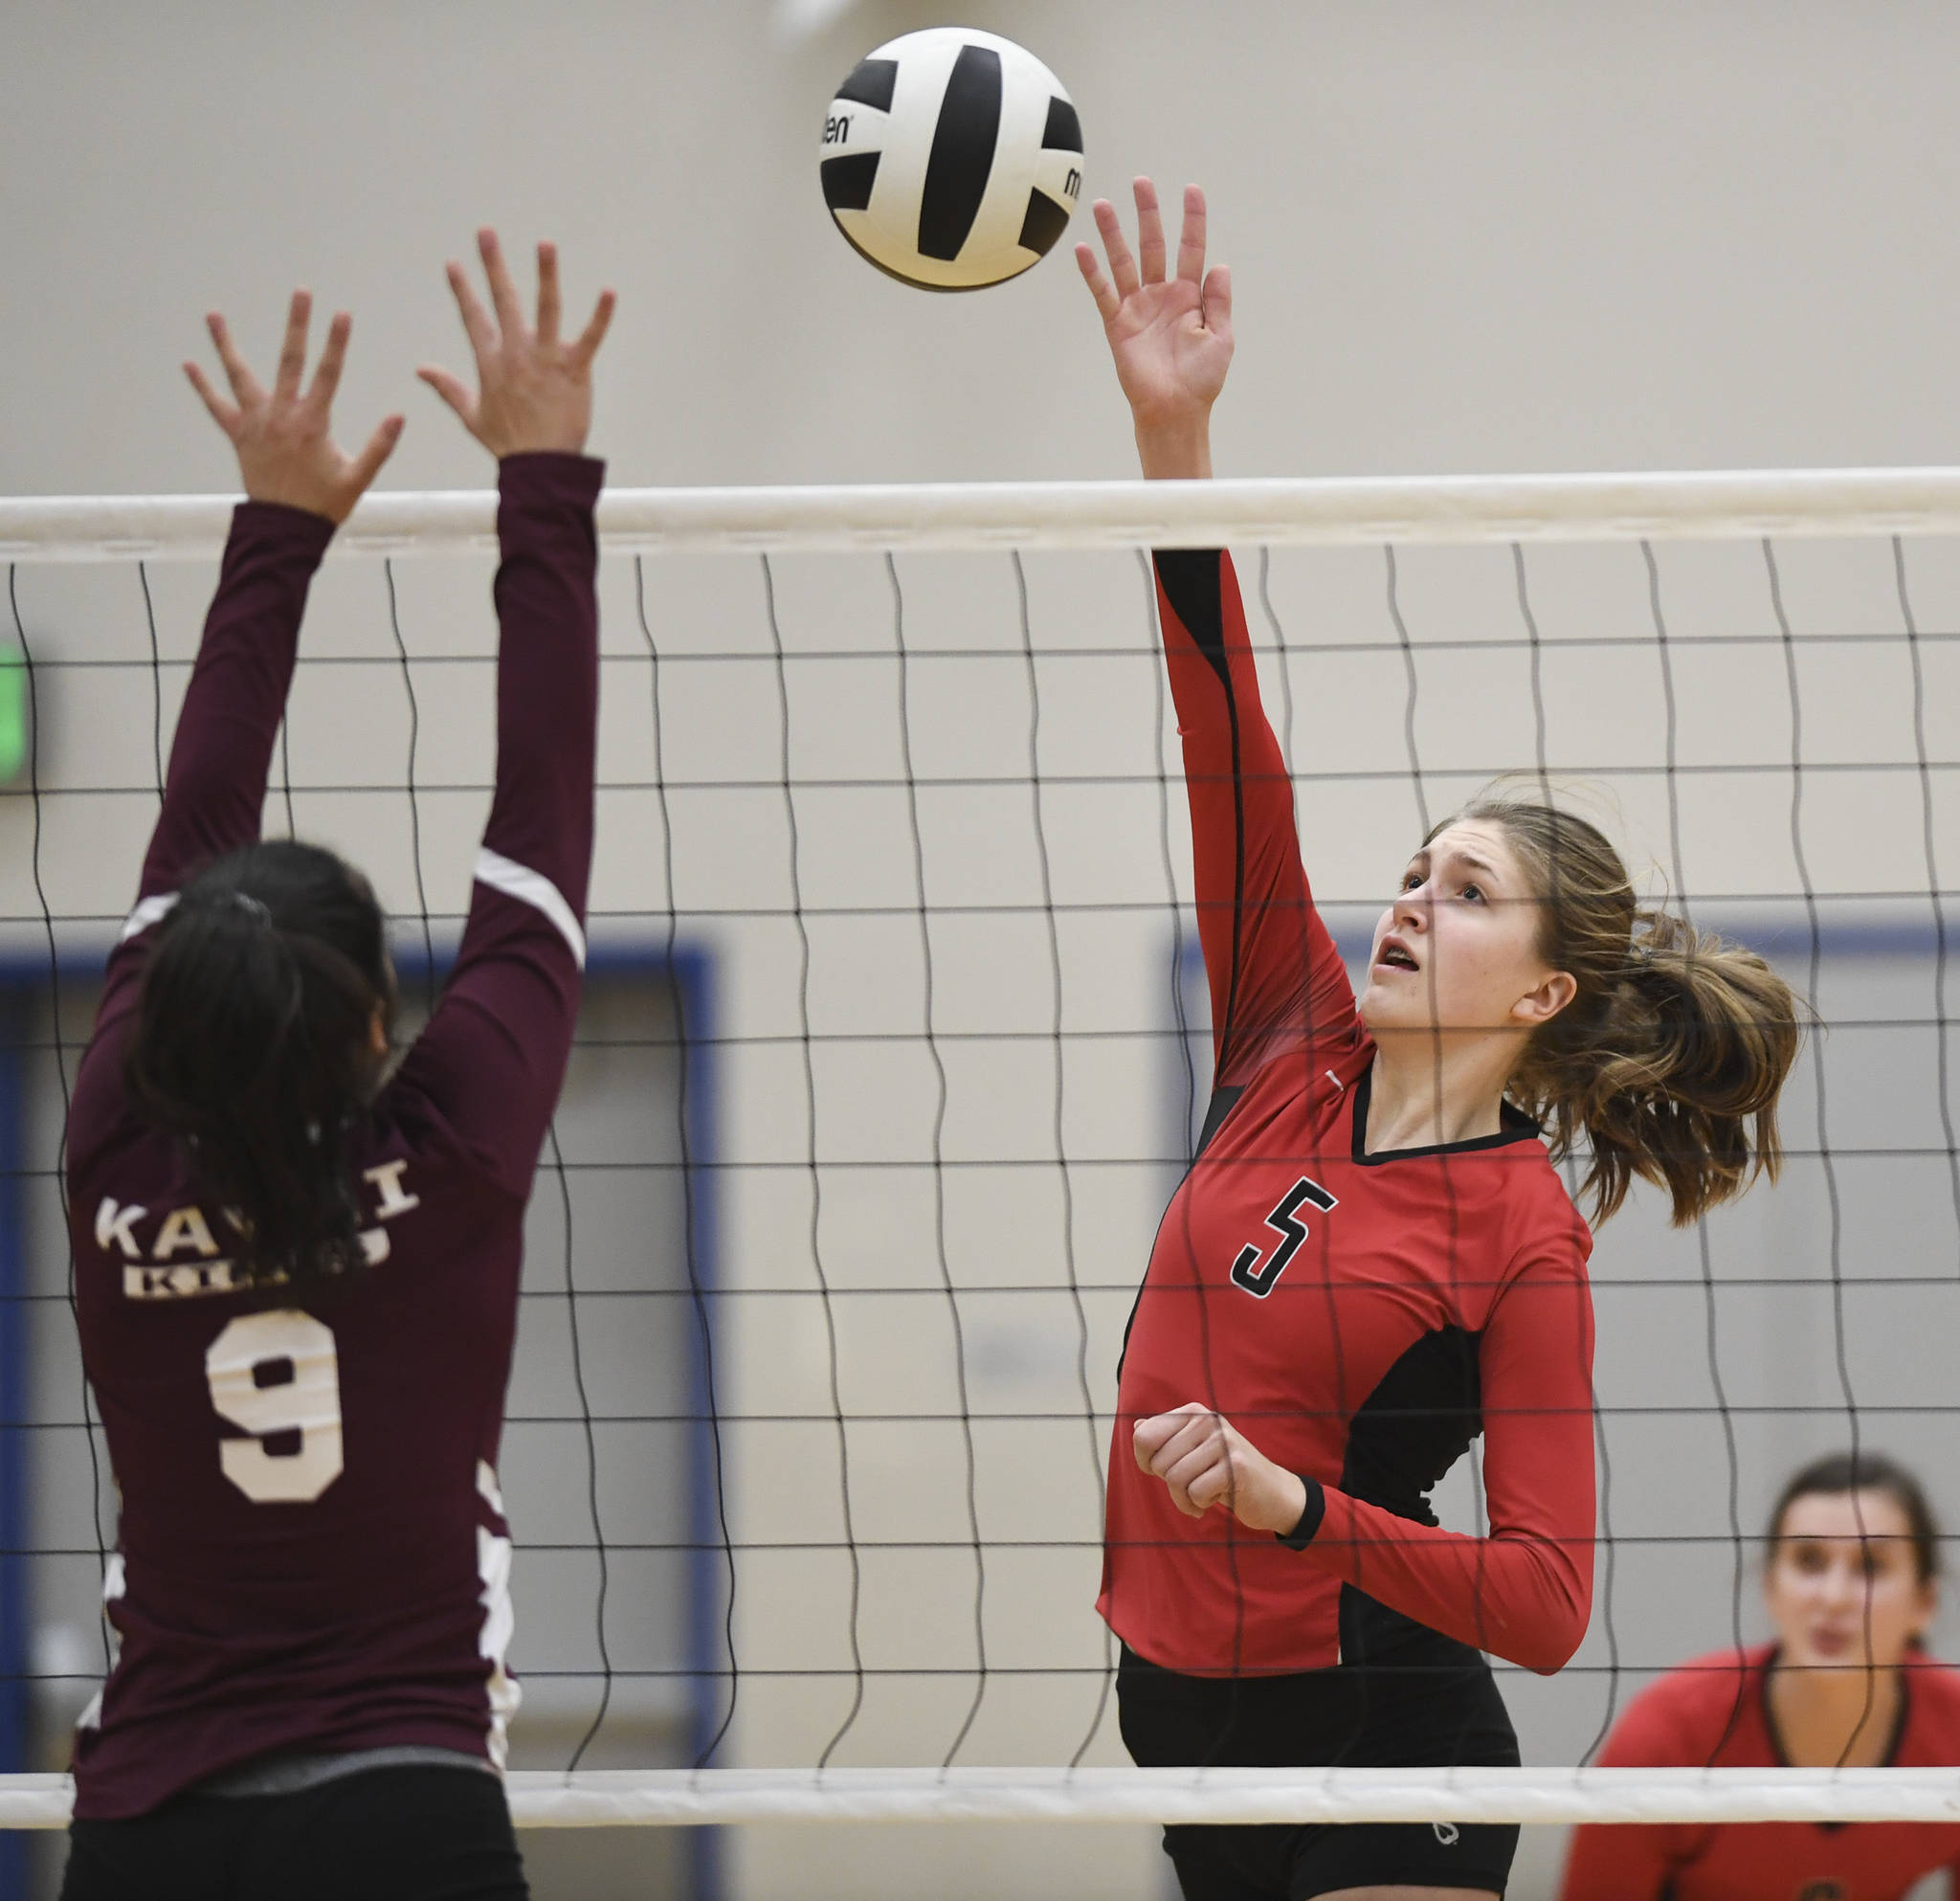 Juneau-Douglas’ Brooke Sanford, right, spikes against Ketchikan’s Maddy Purcell during the Region V Volleyball Tournament at Thunder Mountain High School on Thursday, Nov. 7, 2019. JDHS won 25-8, 25-14, 14-25, 25-15. (Michael Penn | Juneau Empire)